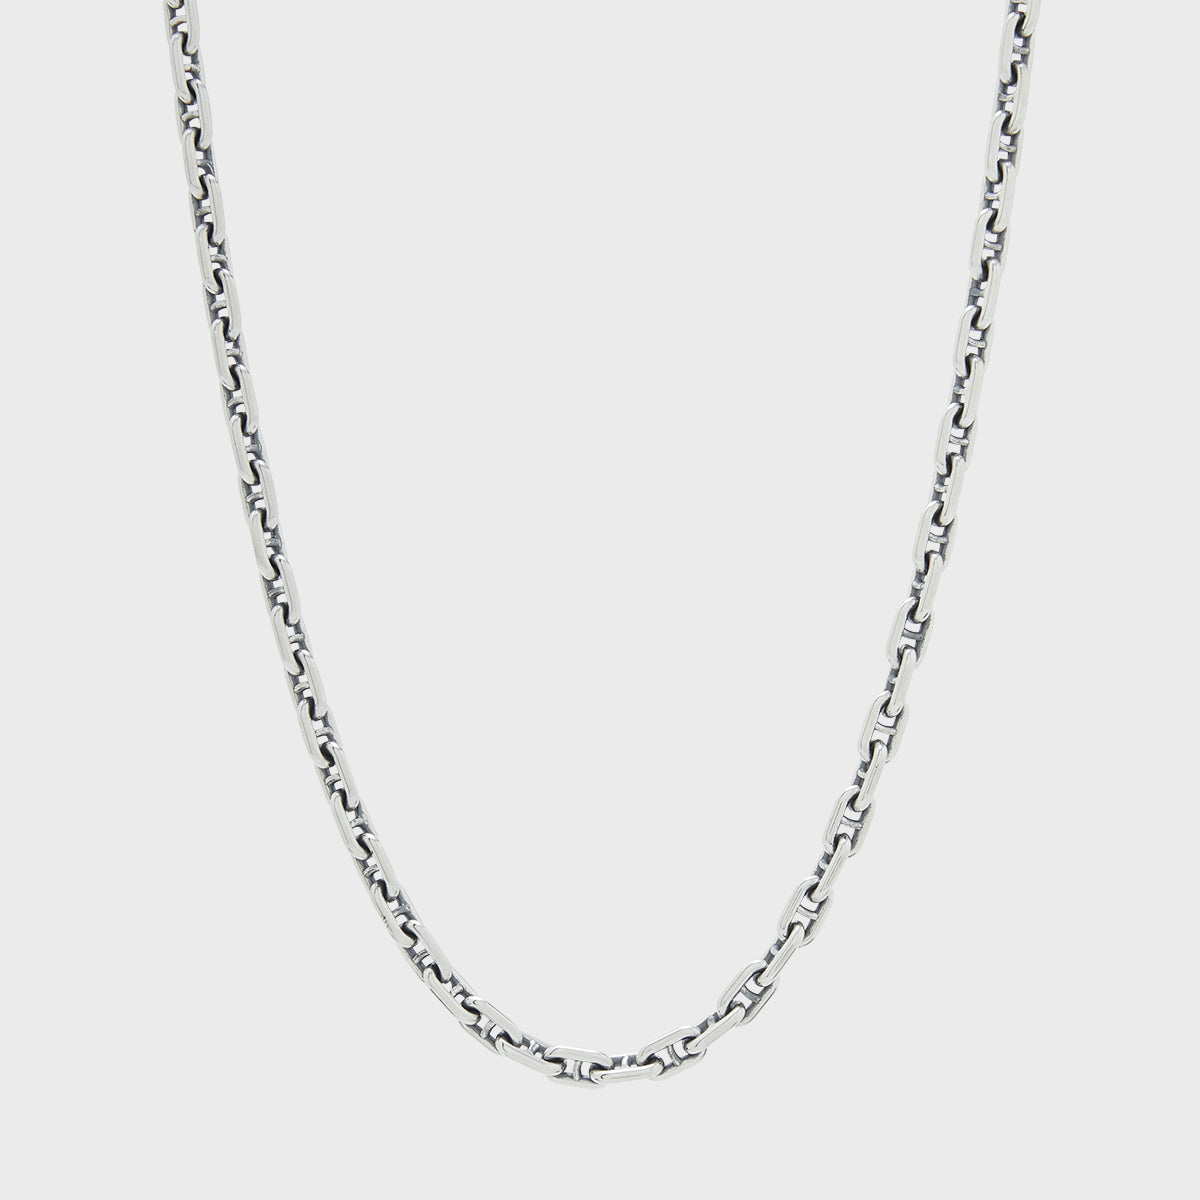 Model 22 Necklace - 3A